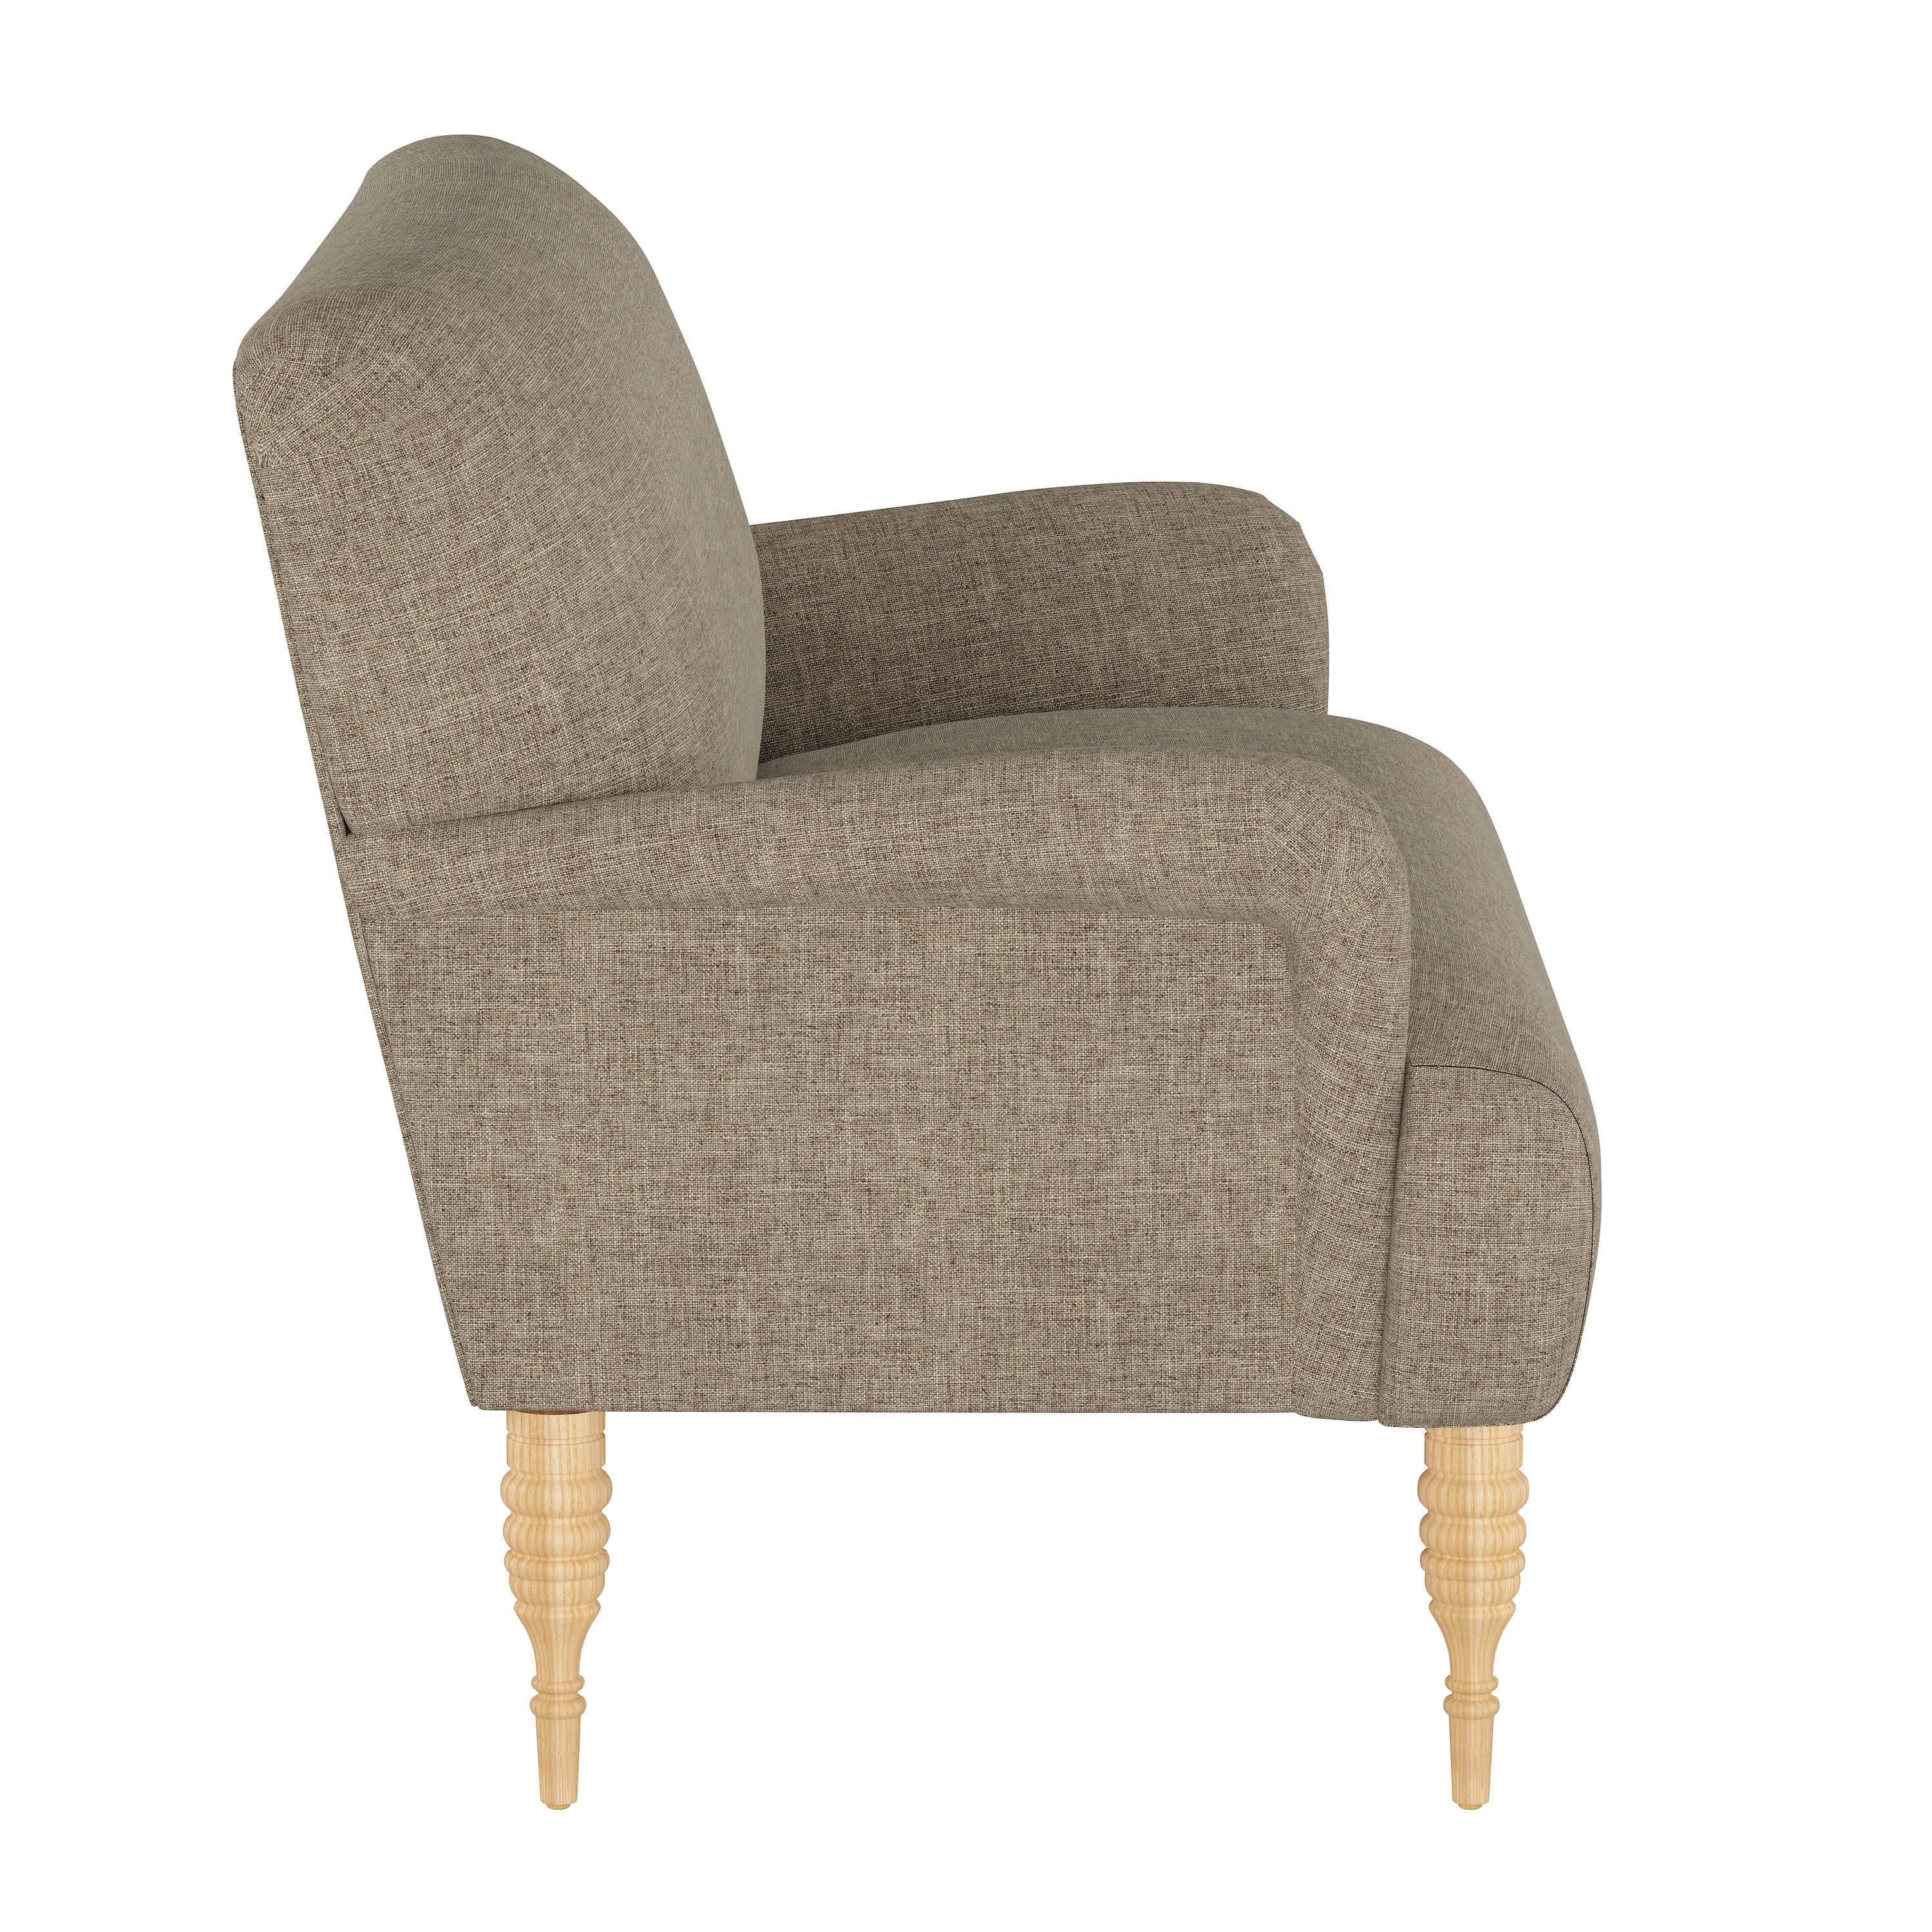 Clermont Settee, Linen - Image 2